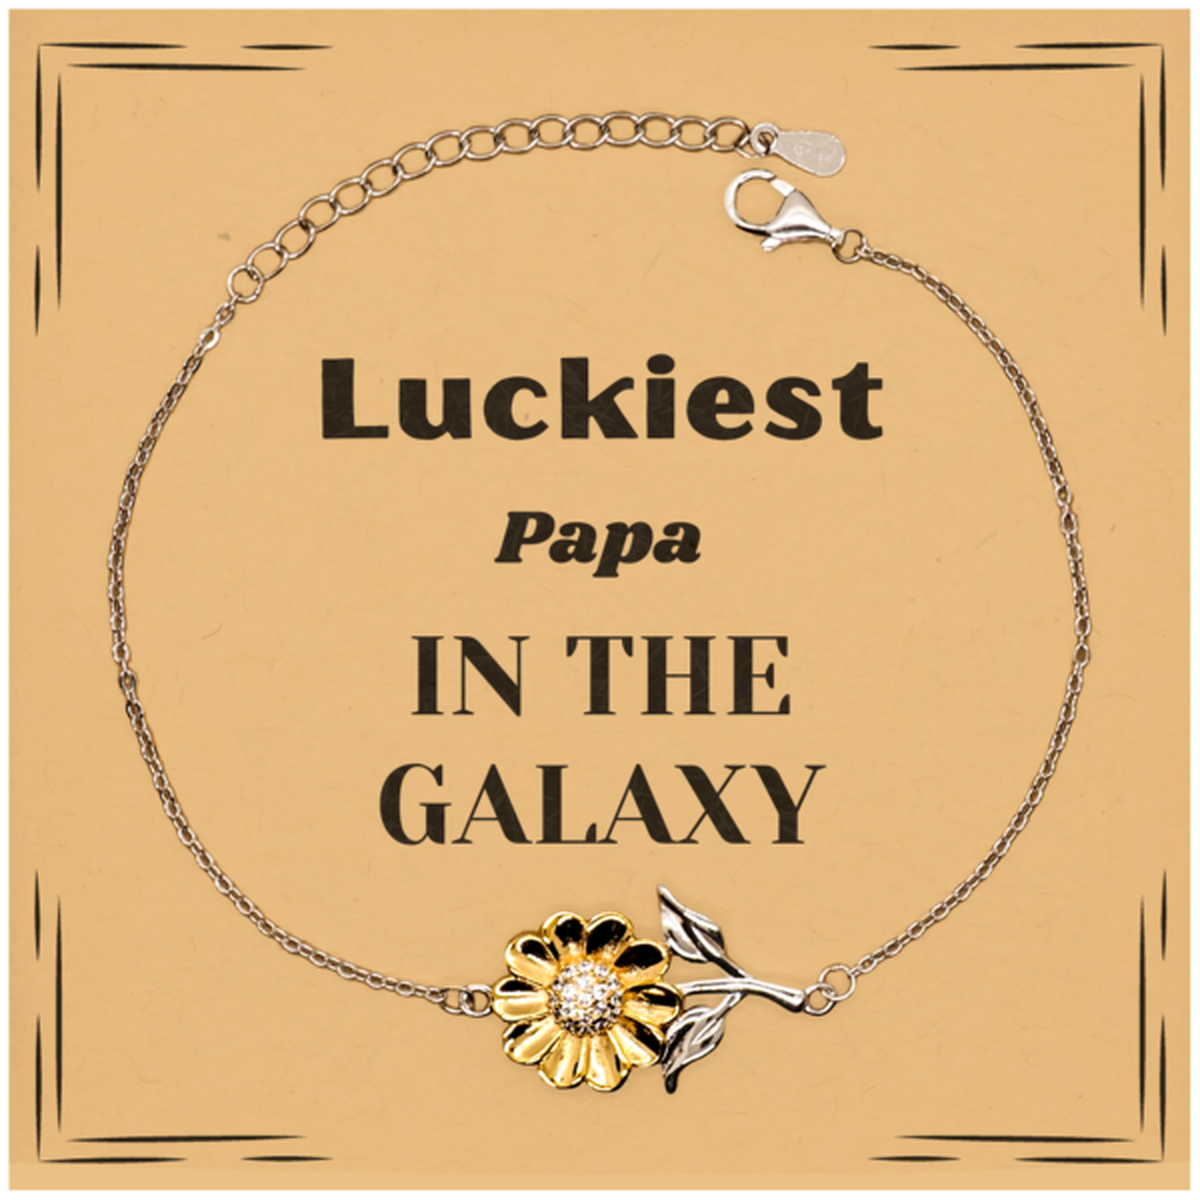 Luckiest Papa in the Galaxy, To My Papa Message Card Gifts, Christmas Papa Sunflower Bracelet Gifts, X-mas Birthday Unique Gifts For Papa Men Women